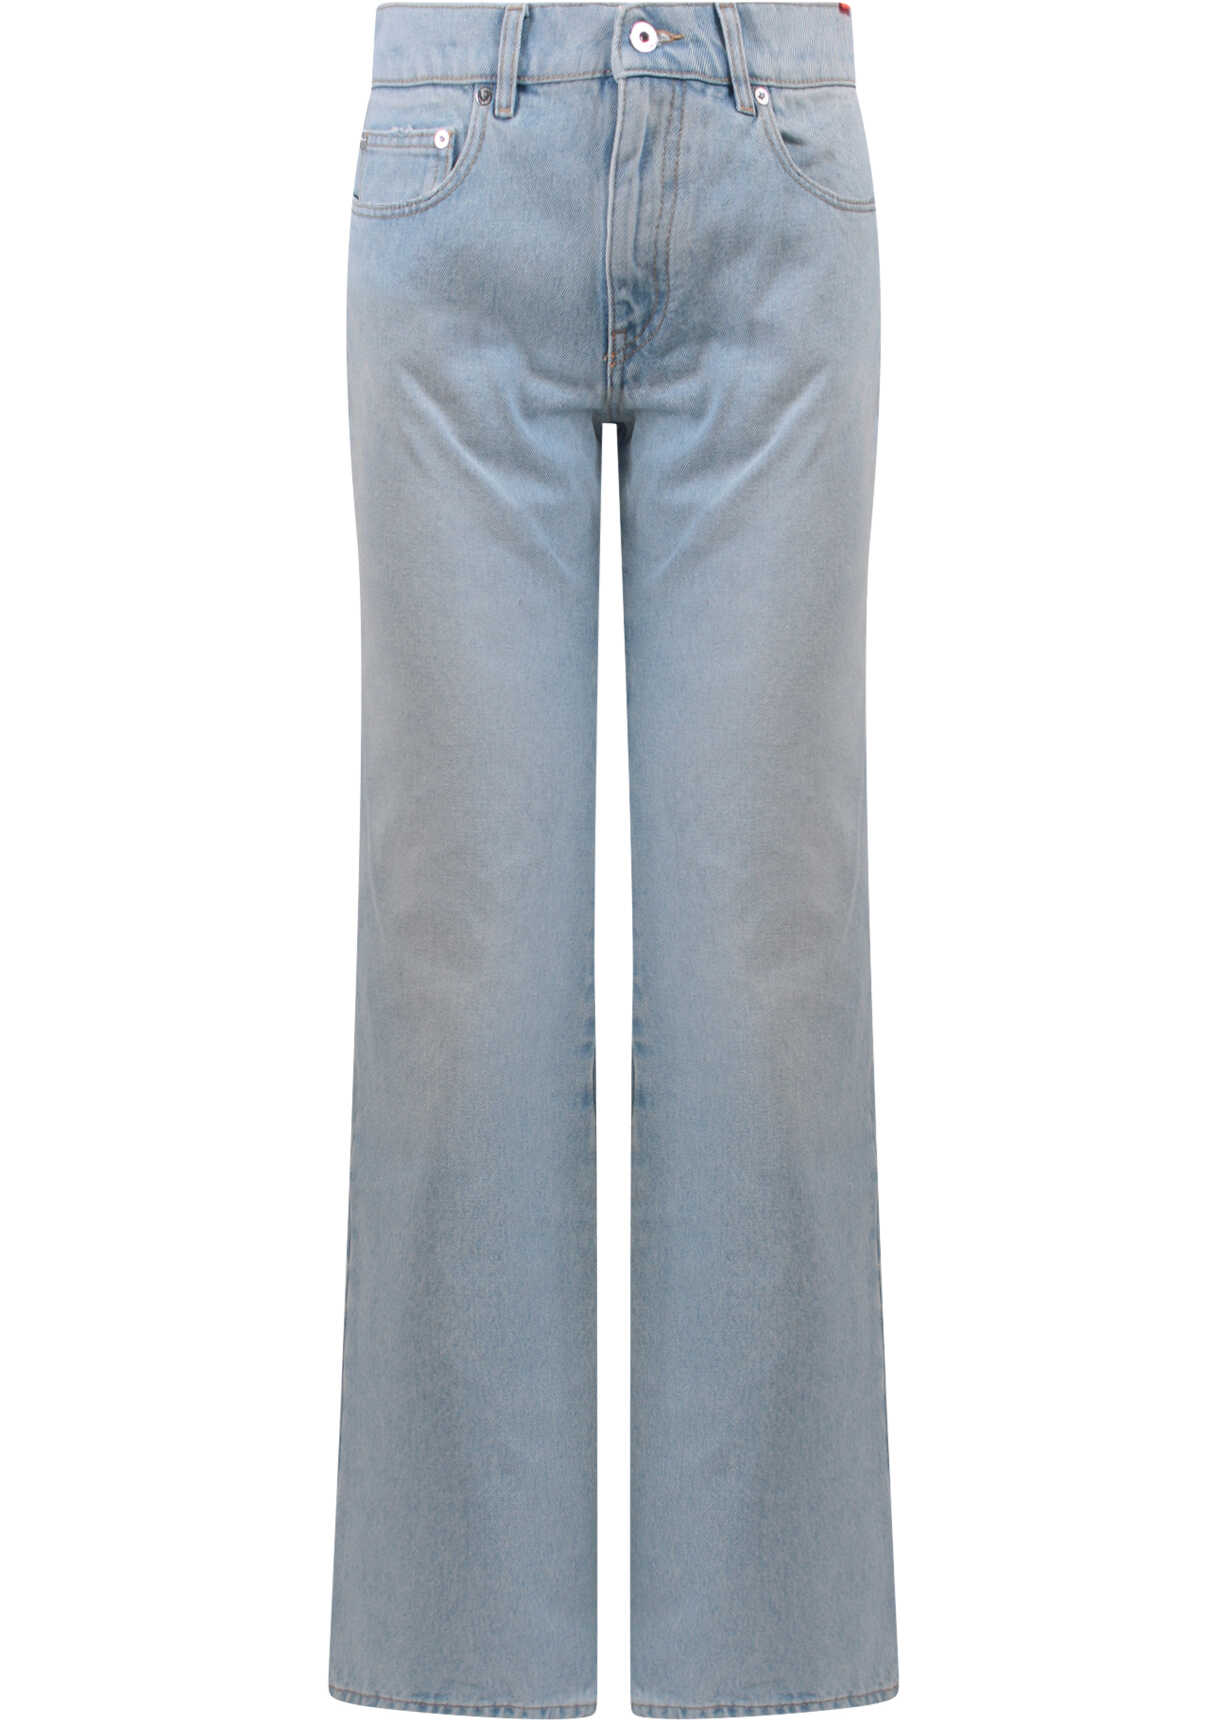 Off-White Jeans Blue image0